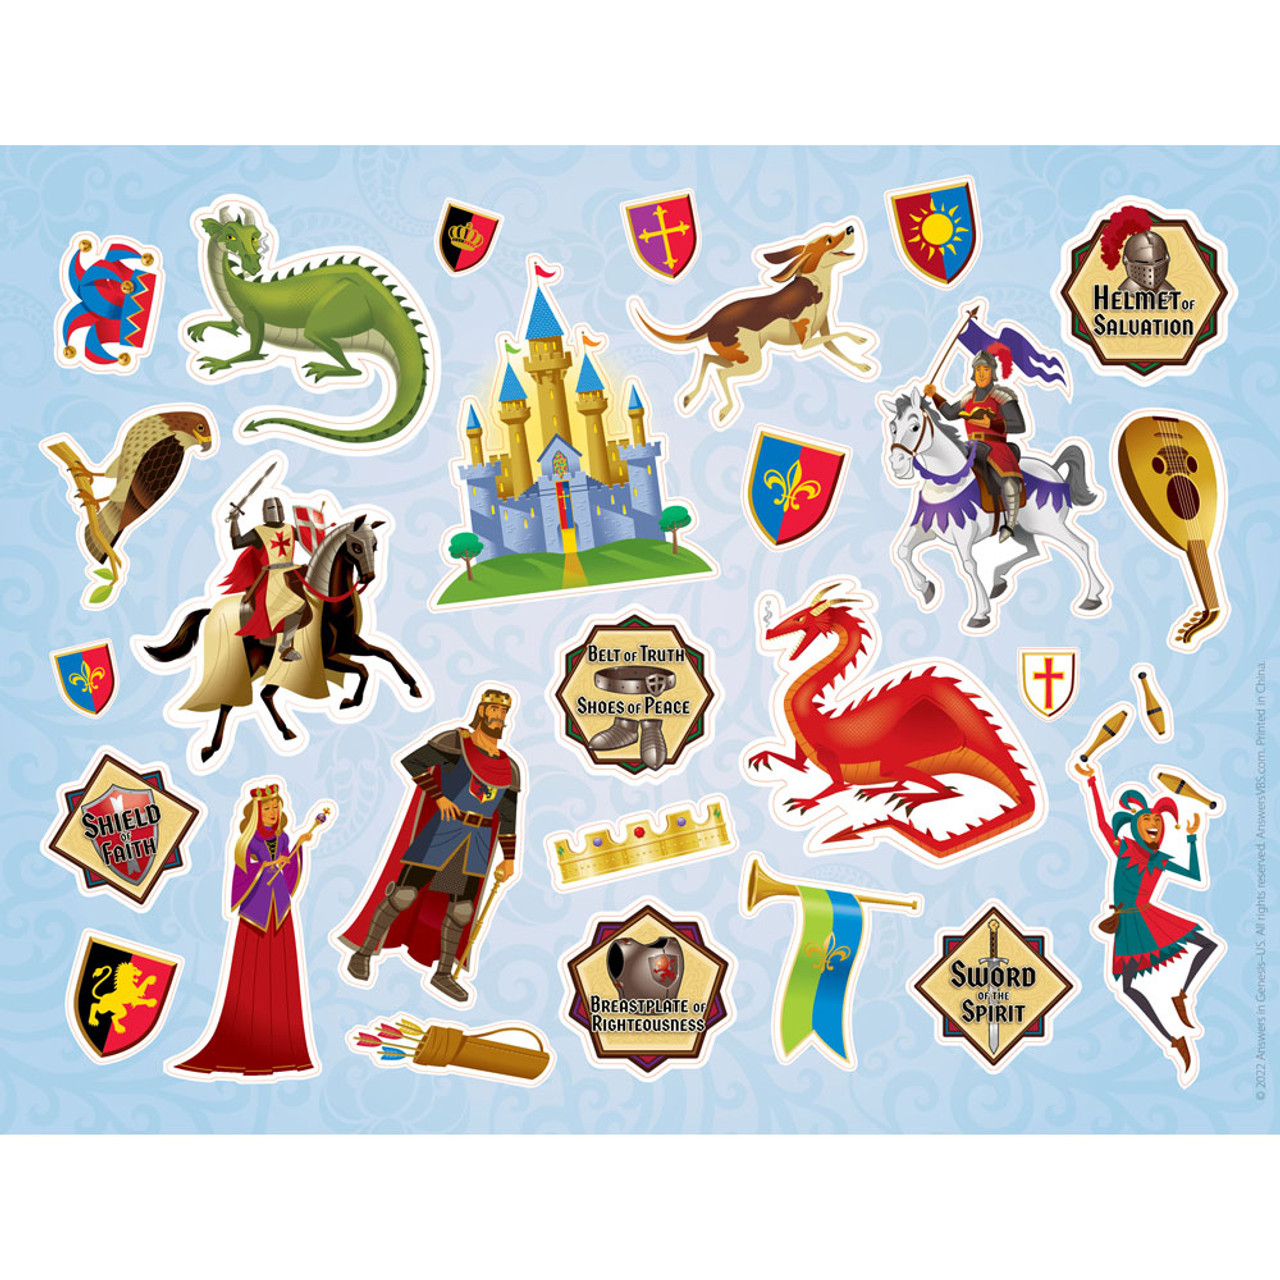 Kids Crafts Foam Stickers You pick- Trains, Castle, Party Favors or more